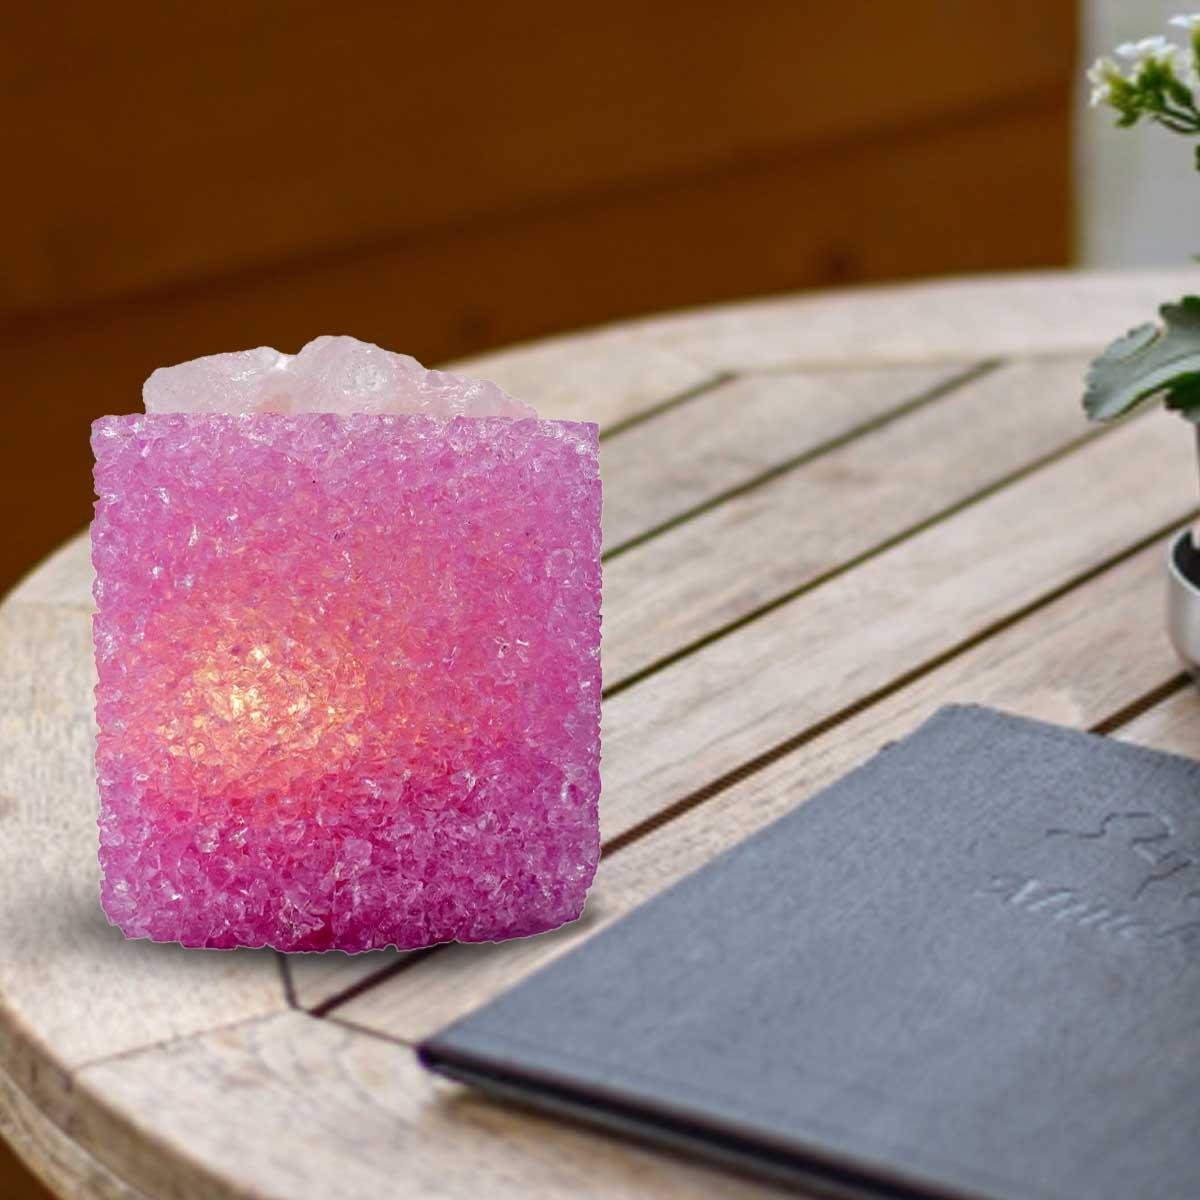 Kookee Natural Crystal Aromatherapy with Essential Oil, Electric Diffuser and LED Light Suitable for Home, Office, Spa for Claming, Soothing and Relaxing (087-1-B)